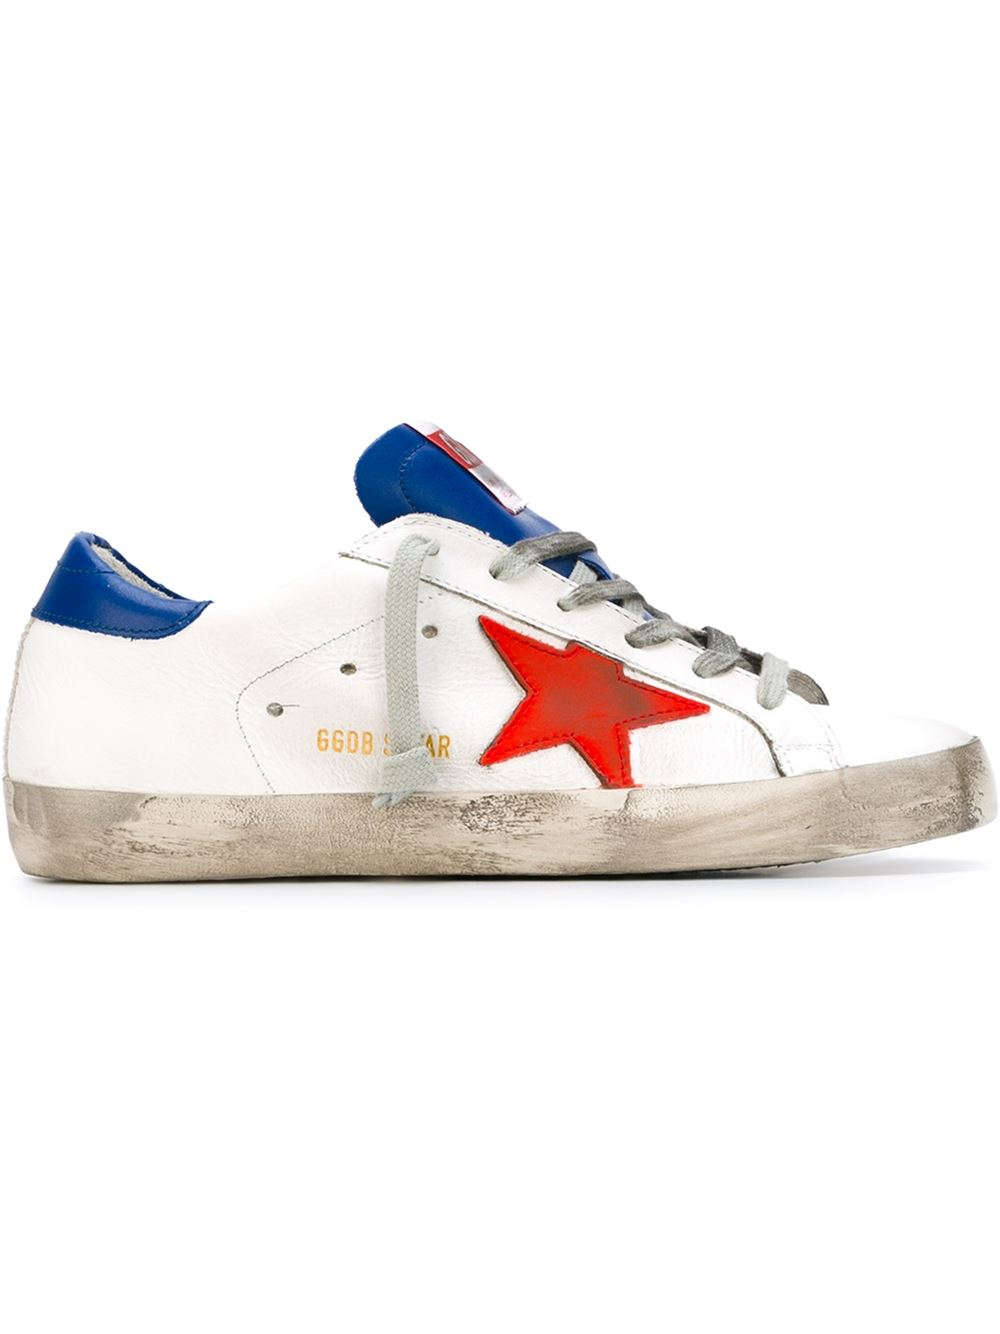 Golden goose deluxe brand Superstar Leather Low-Top Sneakers in White ...